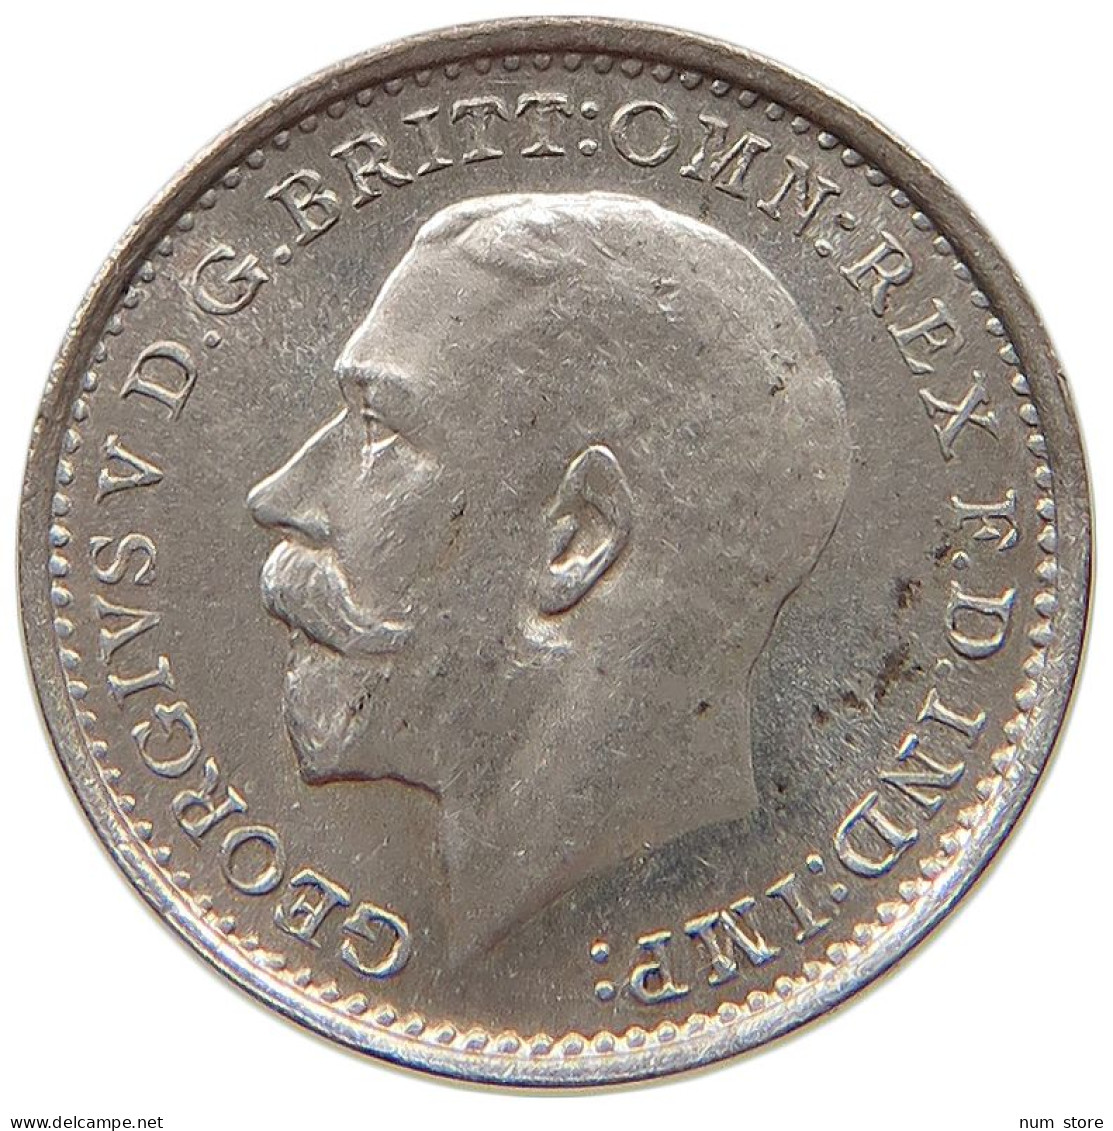 GREAT BRITAIN 2 PENCE 1926 George V. (1910-1936) MAUNDY #t059 0137 - E. 2 Pence